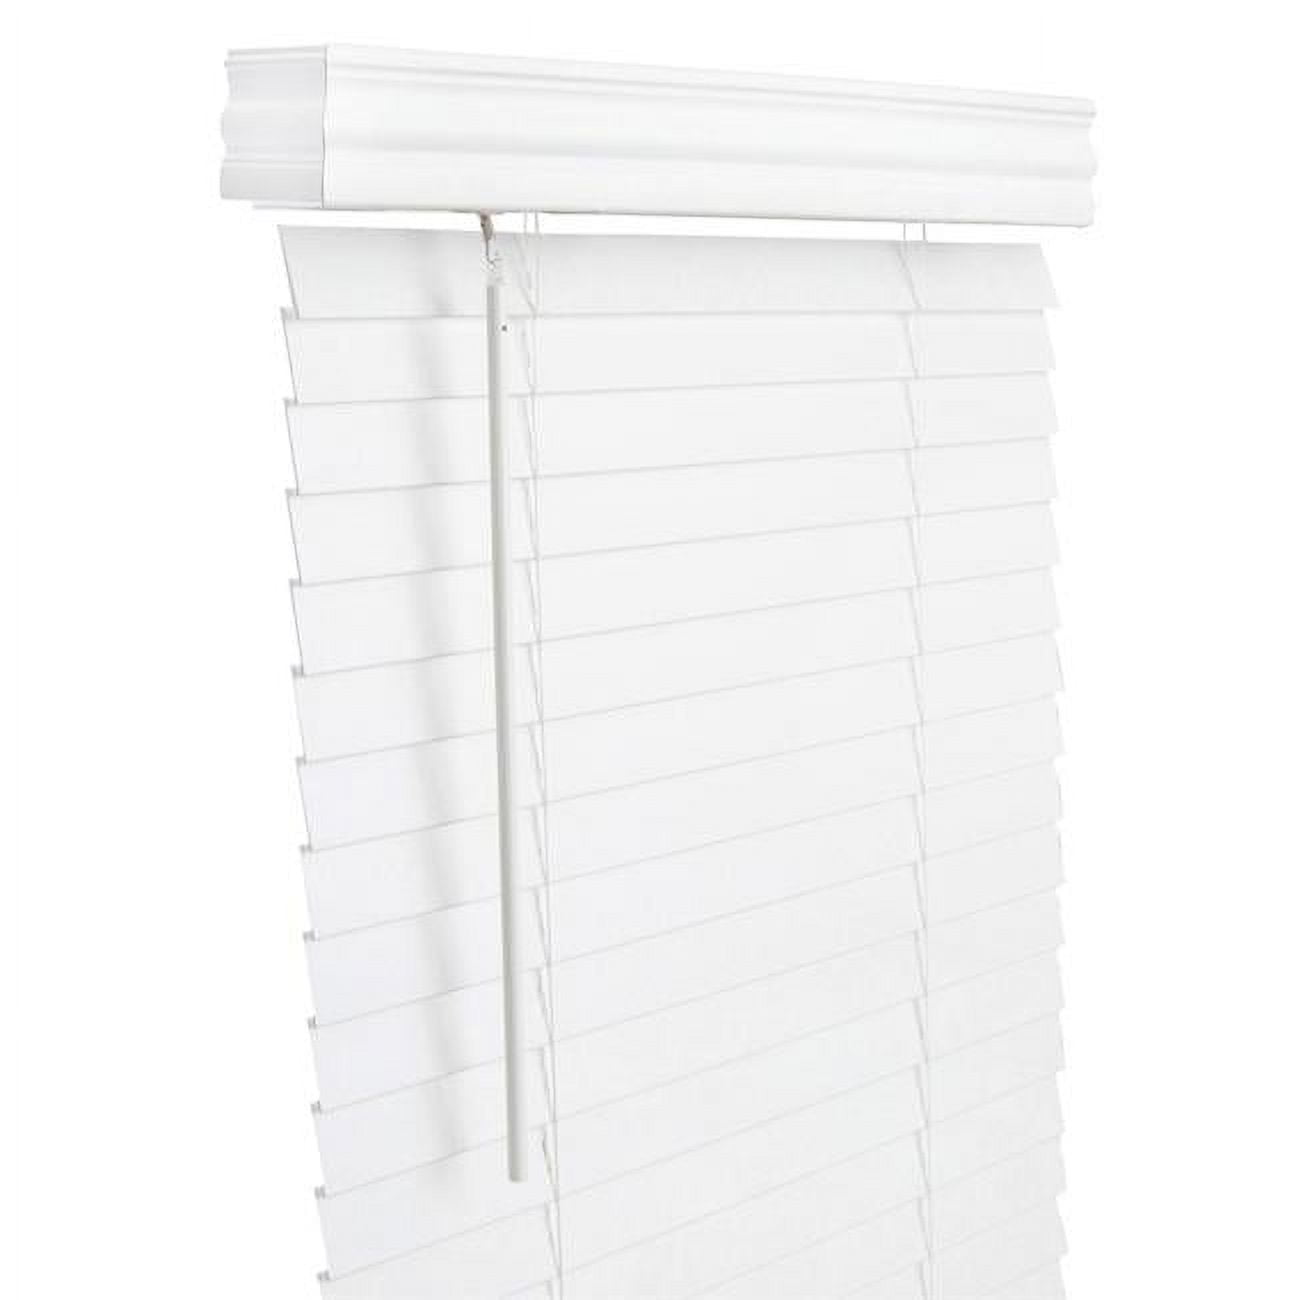 5005761 2 In. Faux Wood Cordless Blinds, White - 35 X 60 In.